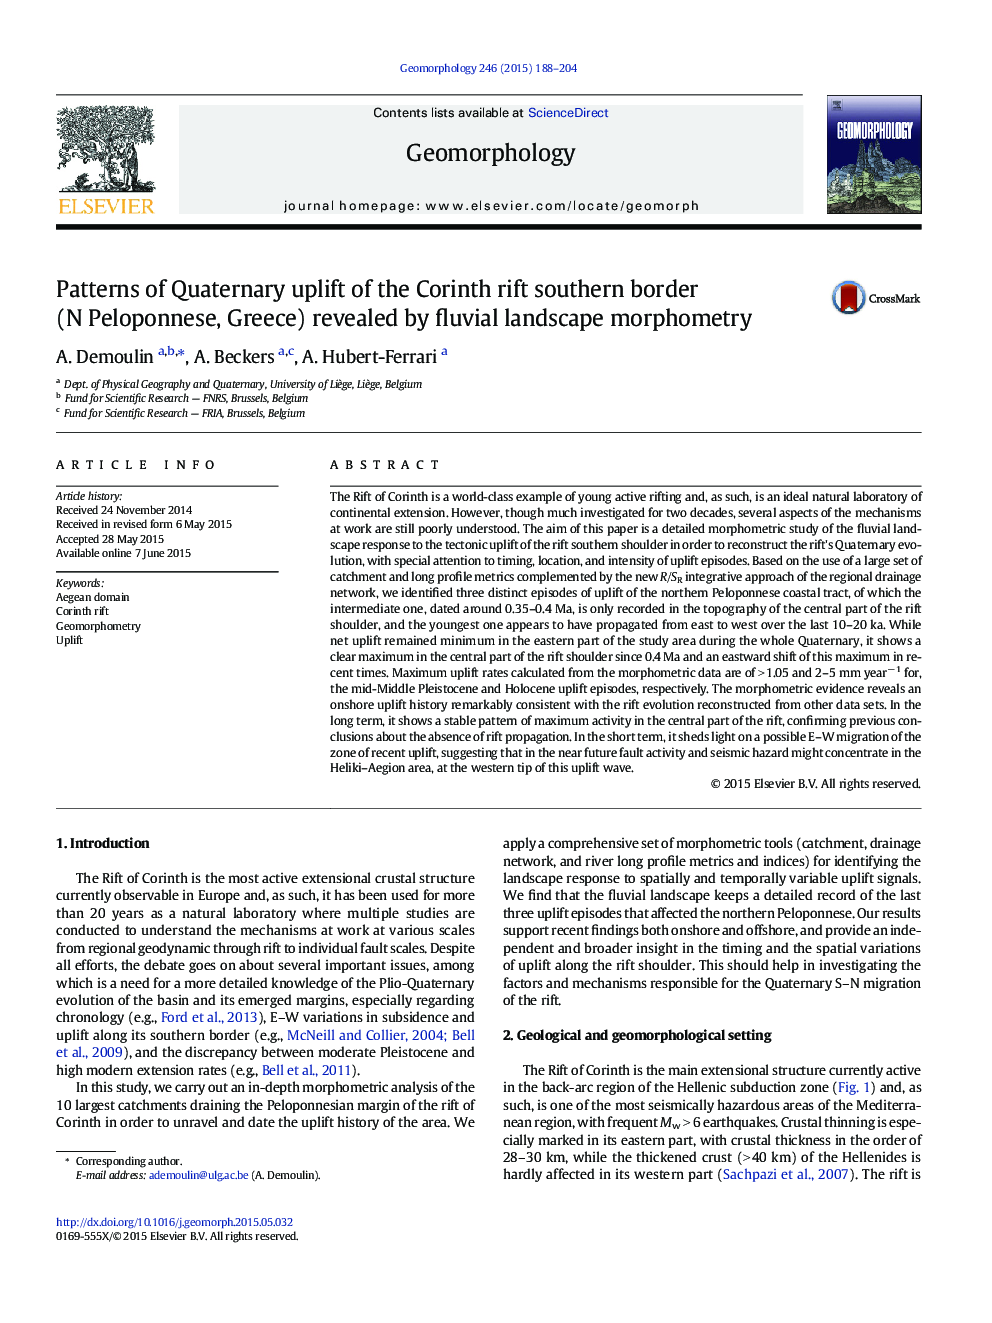 Patterns of Quaternary uplift of the Corinth rift southern border (N Peloponnese, Greece) revealed by fluvial landscape morphometry